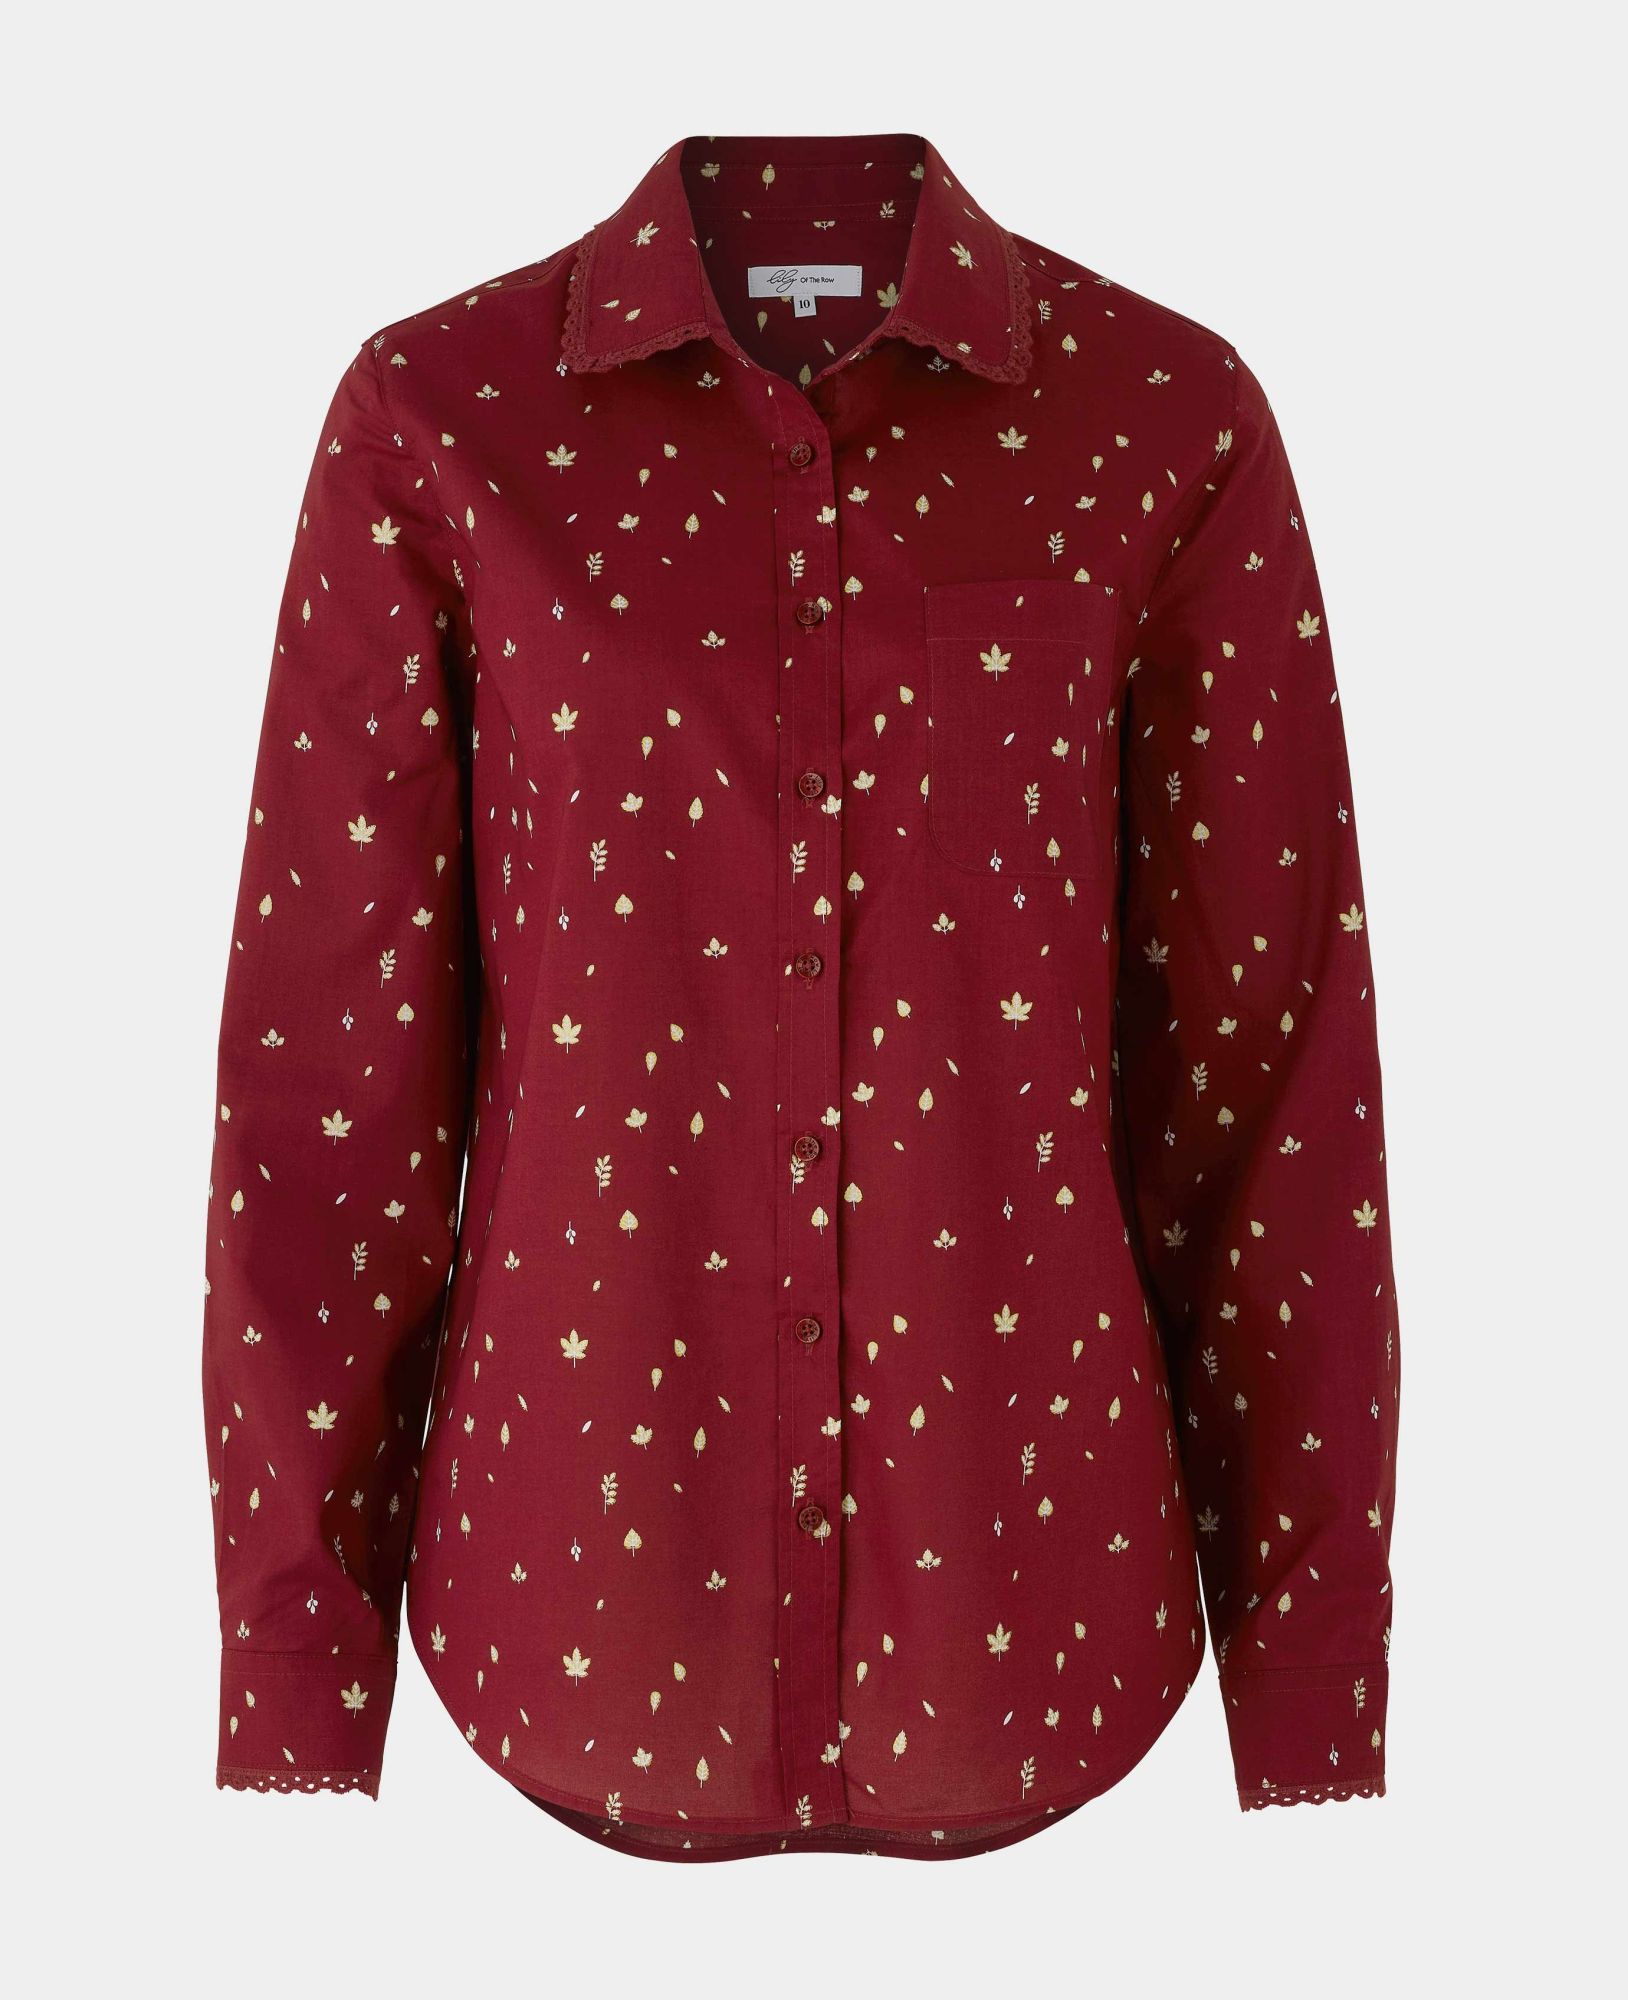 Women's Deep Red Leaf Print Semi Fitted Shirt 16